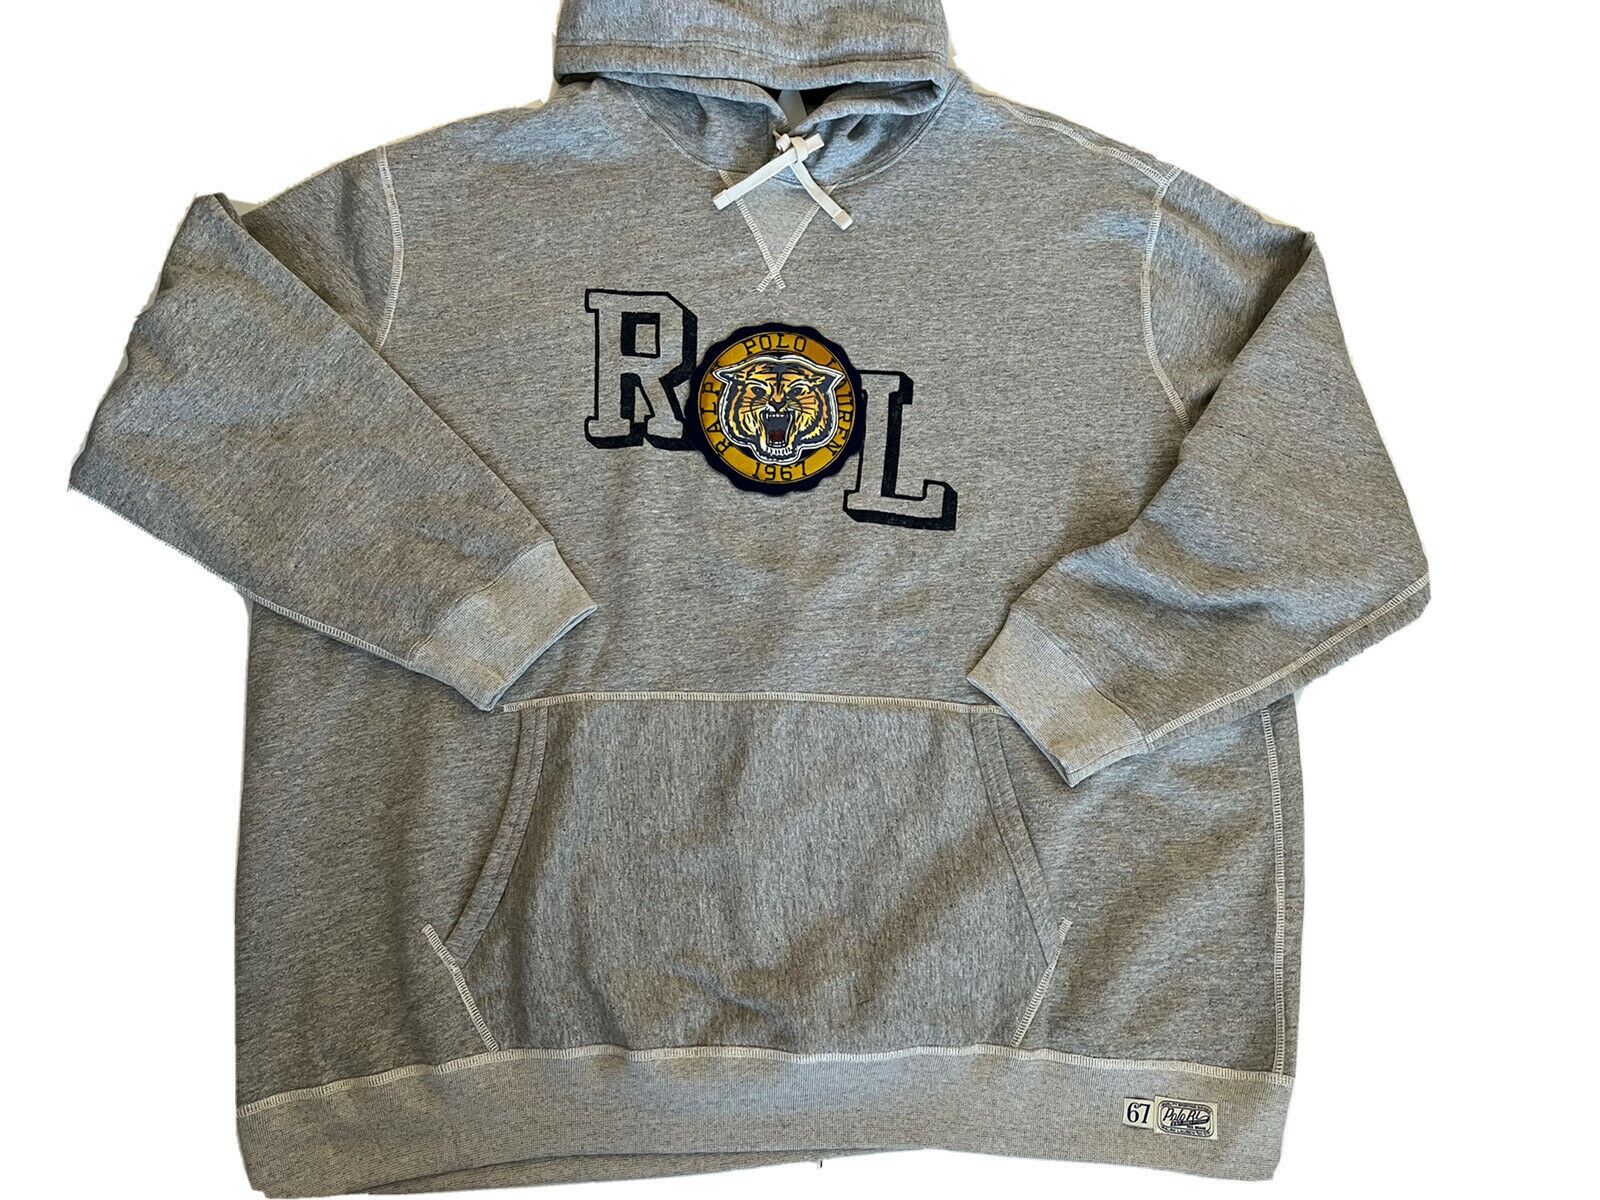 NWT $168 Polo Ralph Lauren Tiger Gray Sweater with Hoodie 3XLT